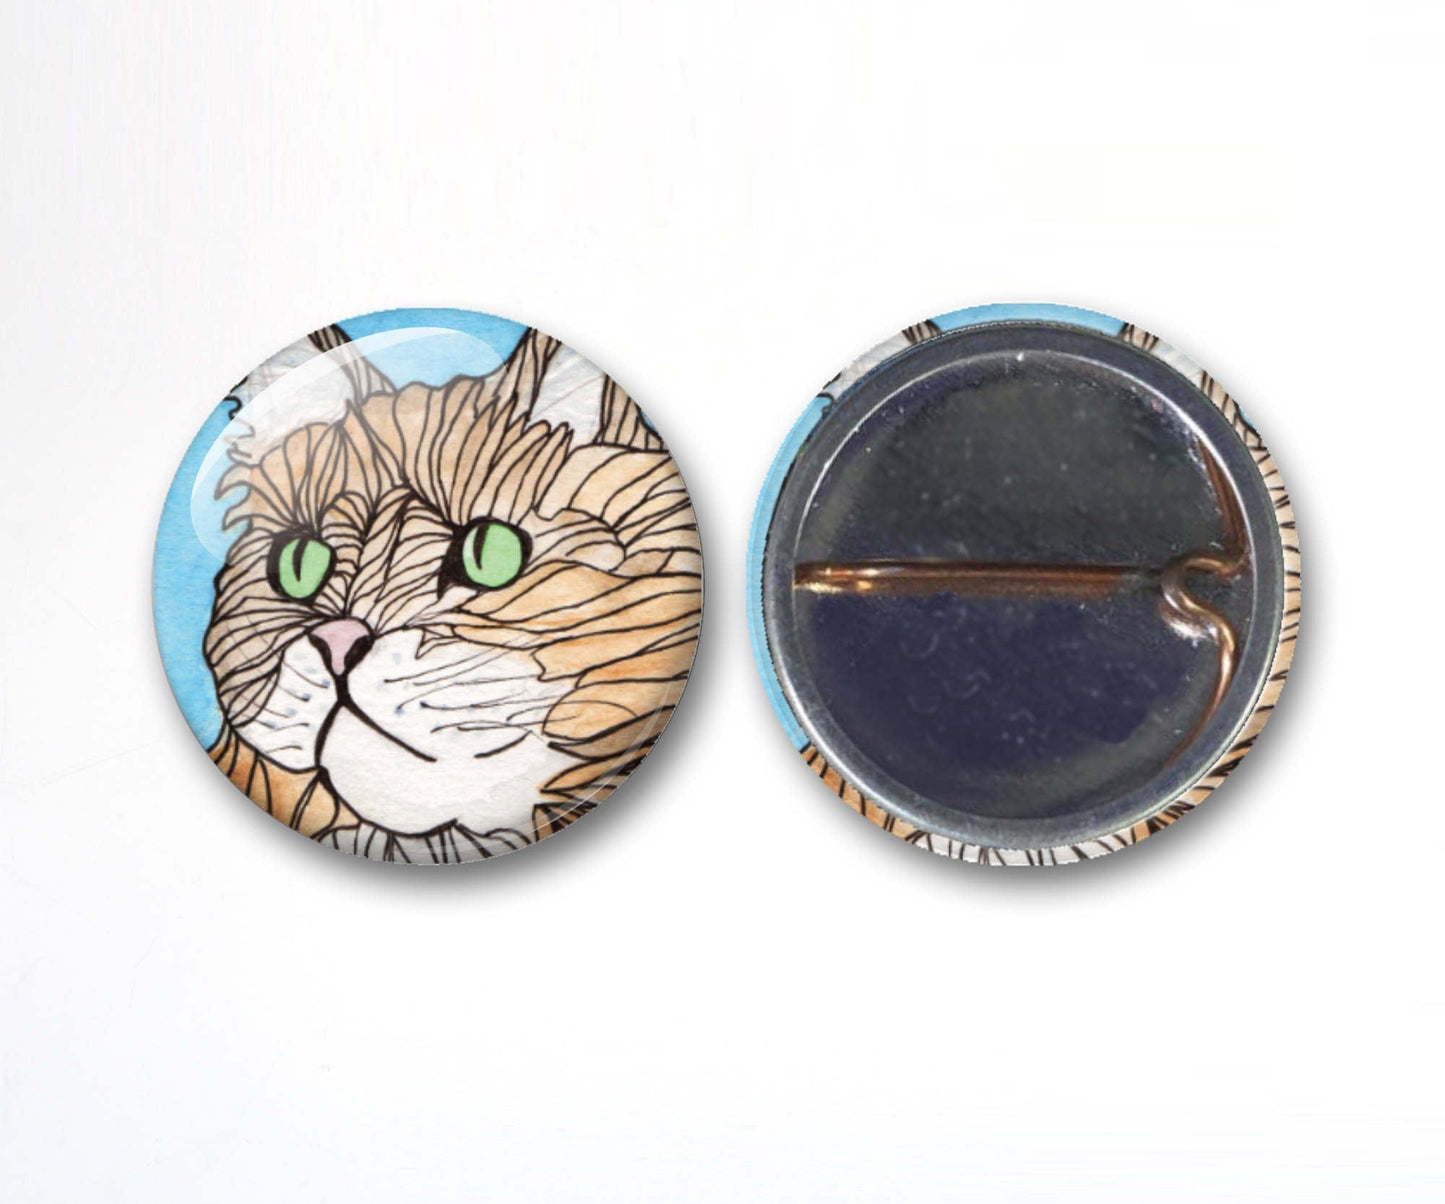 PinkPolish Design Buttons "Cat and Mouse" Button Pack - 3-Pack Pin Back Button, 1 Inch